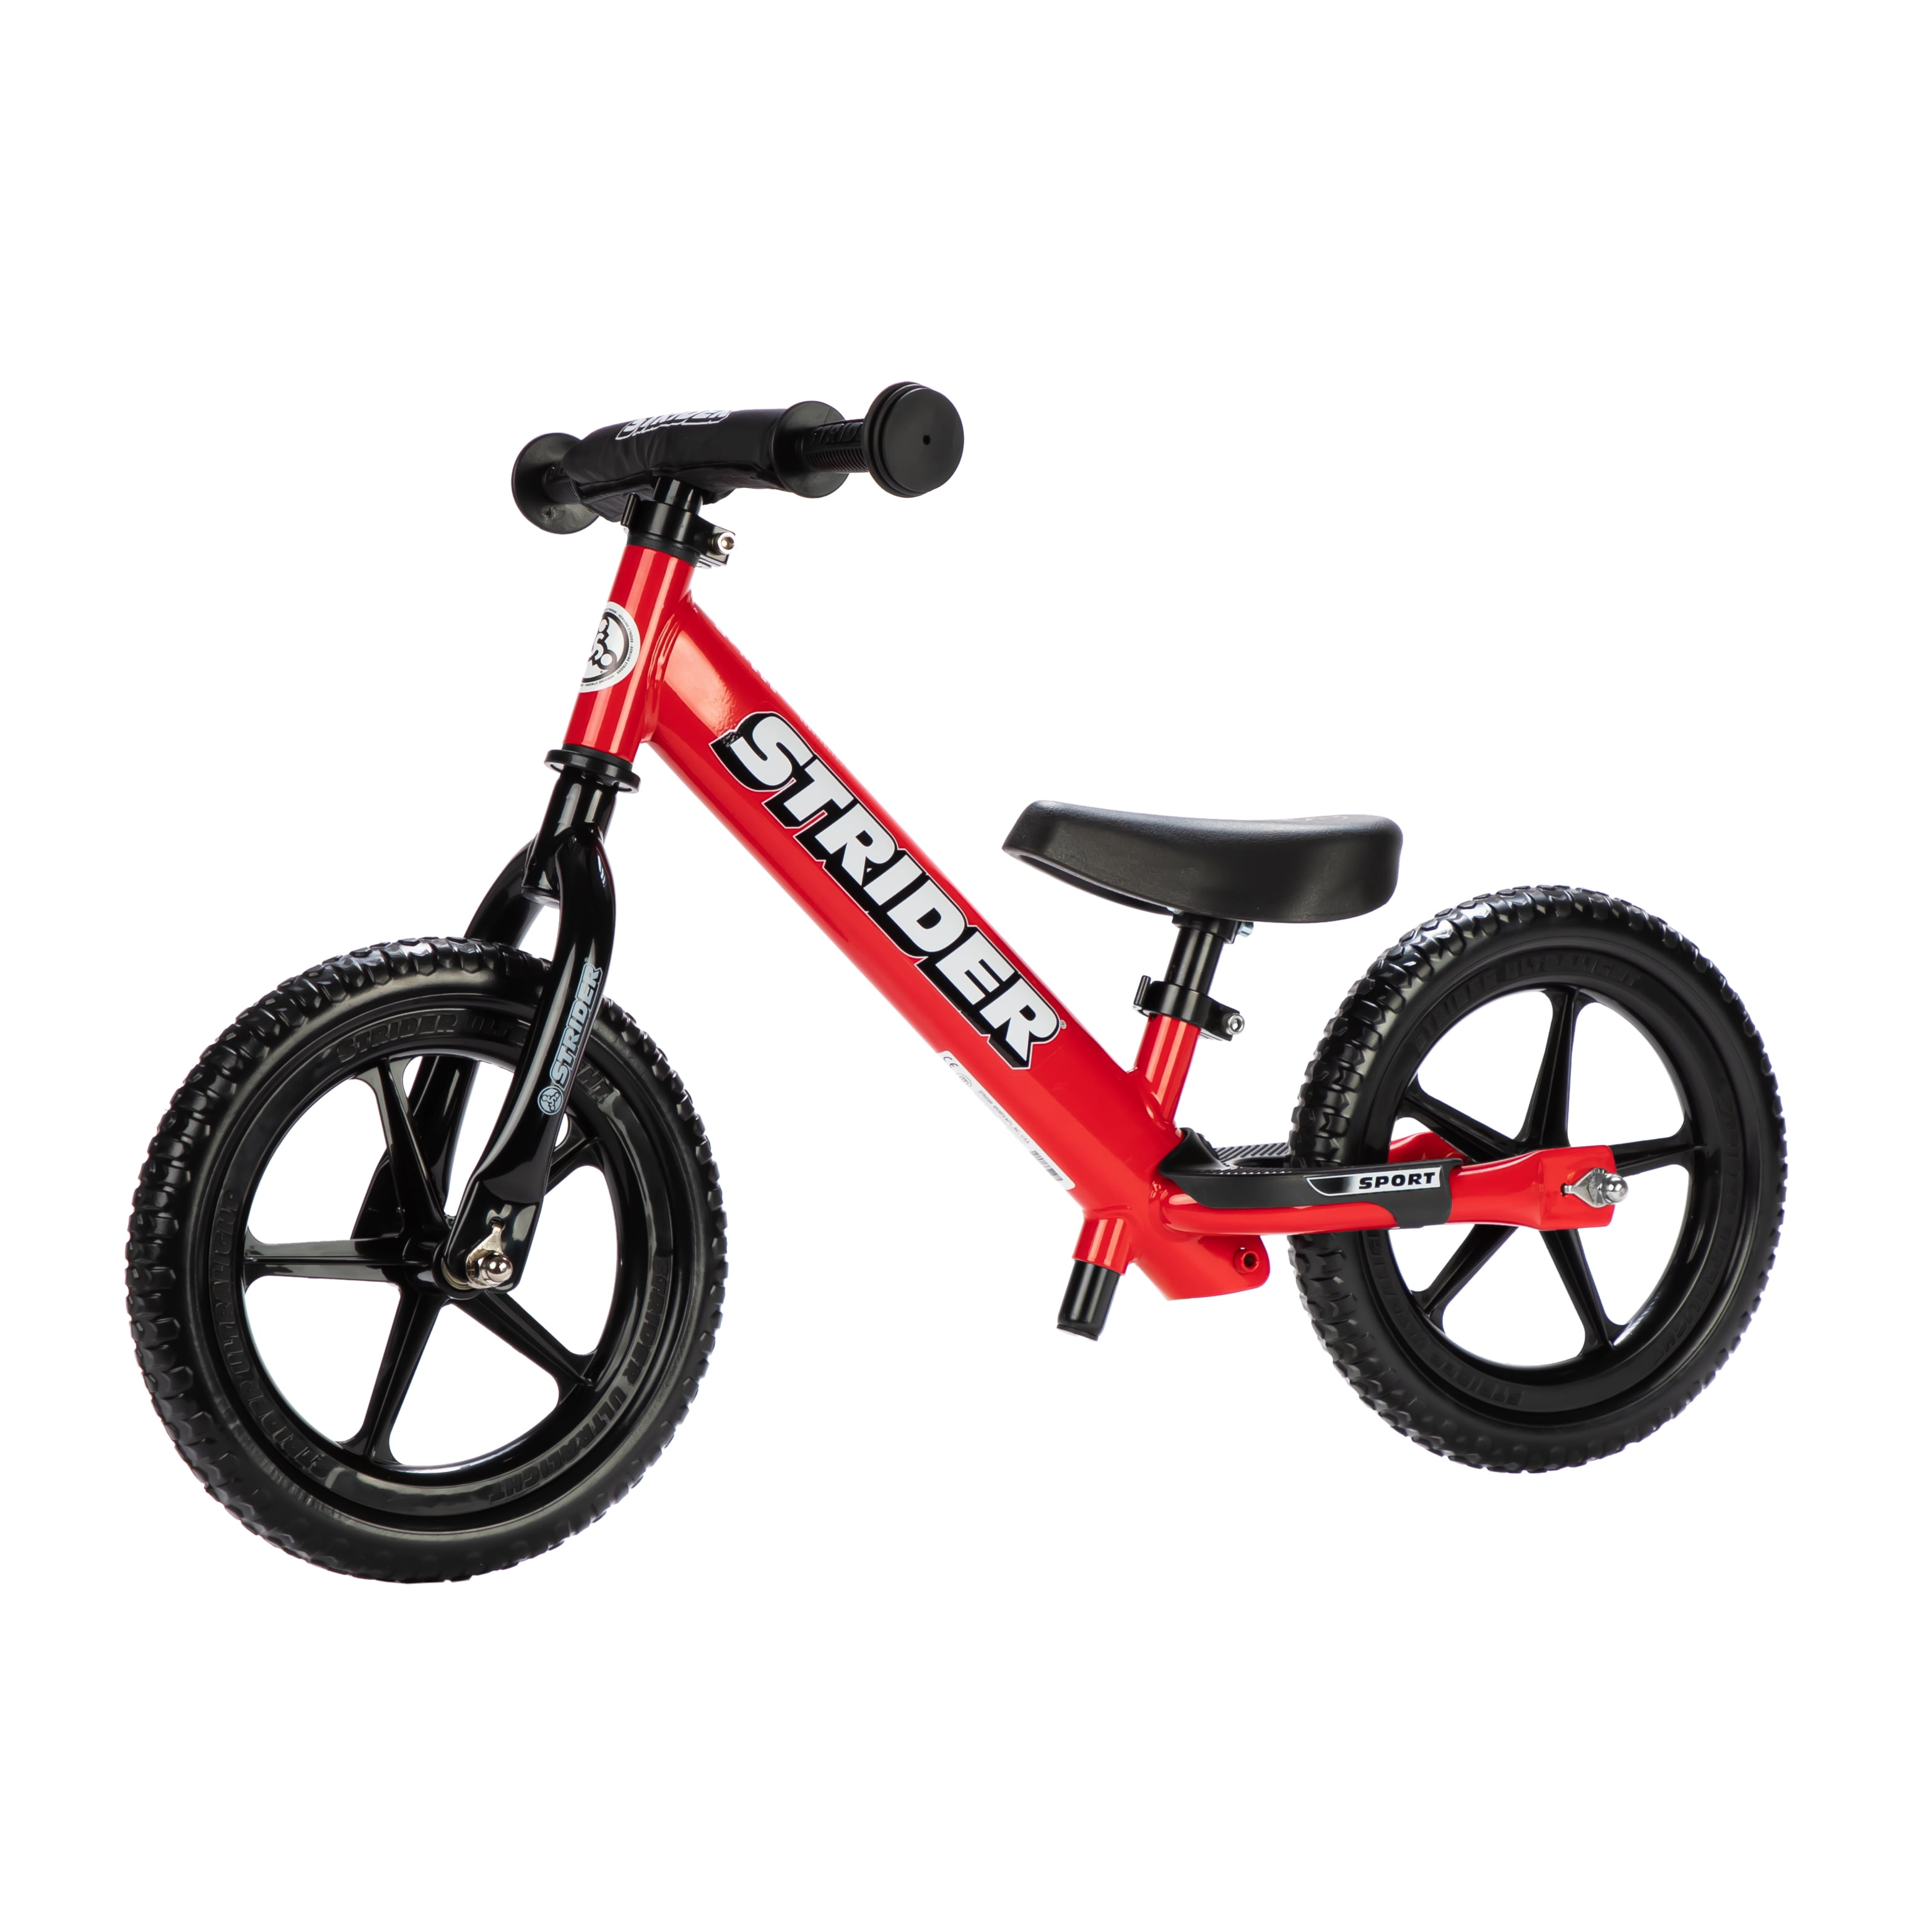 Strider - 12 Sport Balance Bike, Ages 18 Months to 5 Years - Red - image 1 of 13